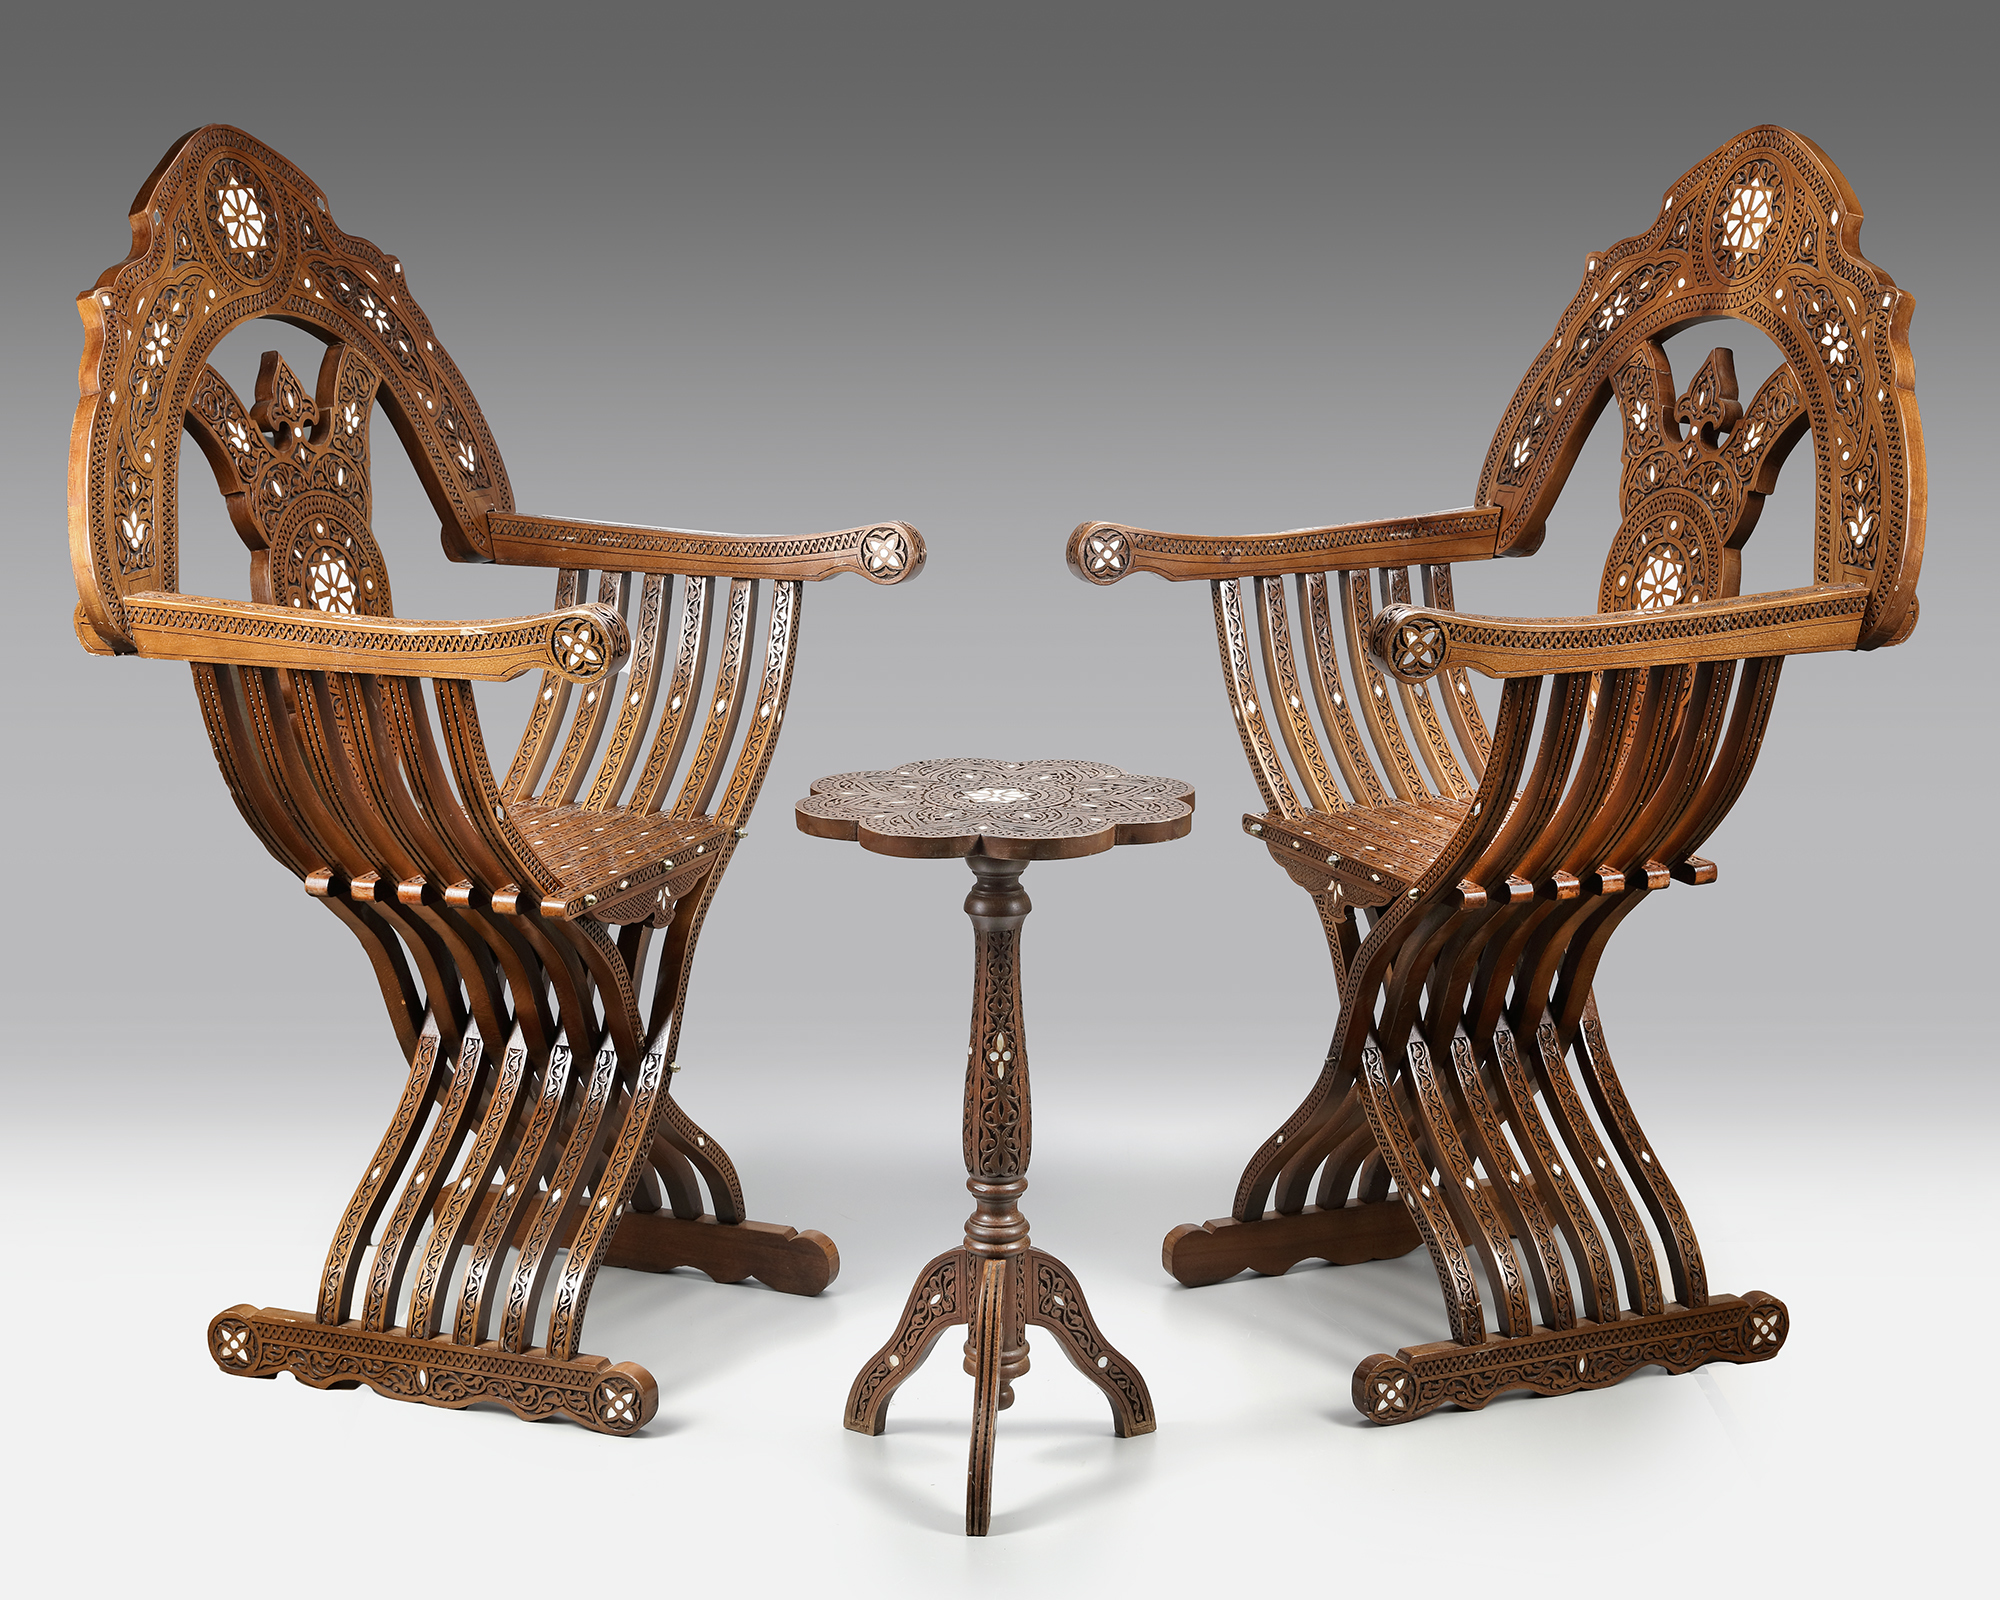 A PAIR OF SYRIAN MOTHER OF PEARL INLAID FOLDING CHAIRS AND A TABLE, LATE 19TH CENTURY - Image 2 of 3